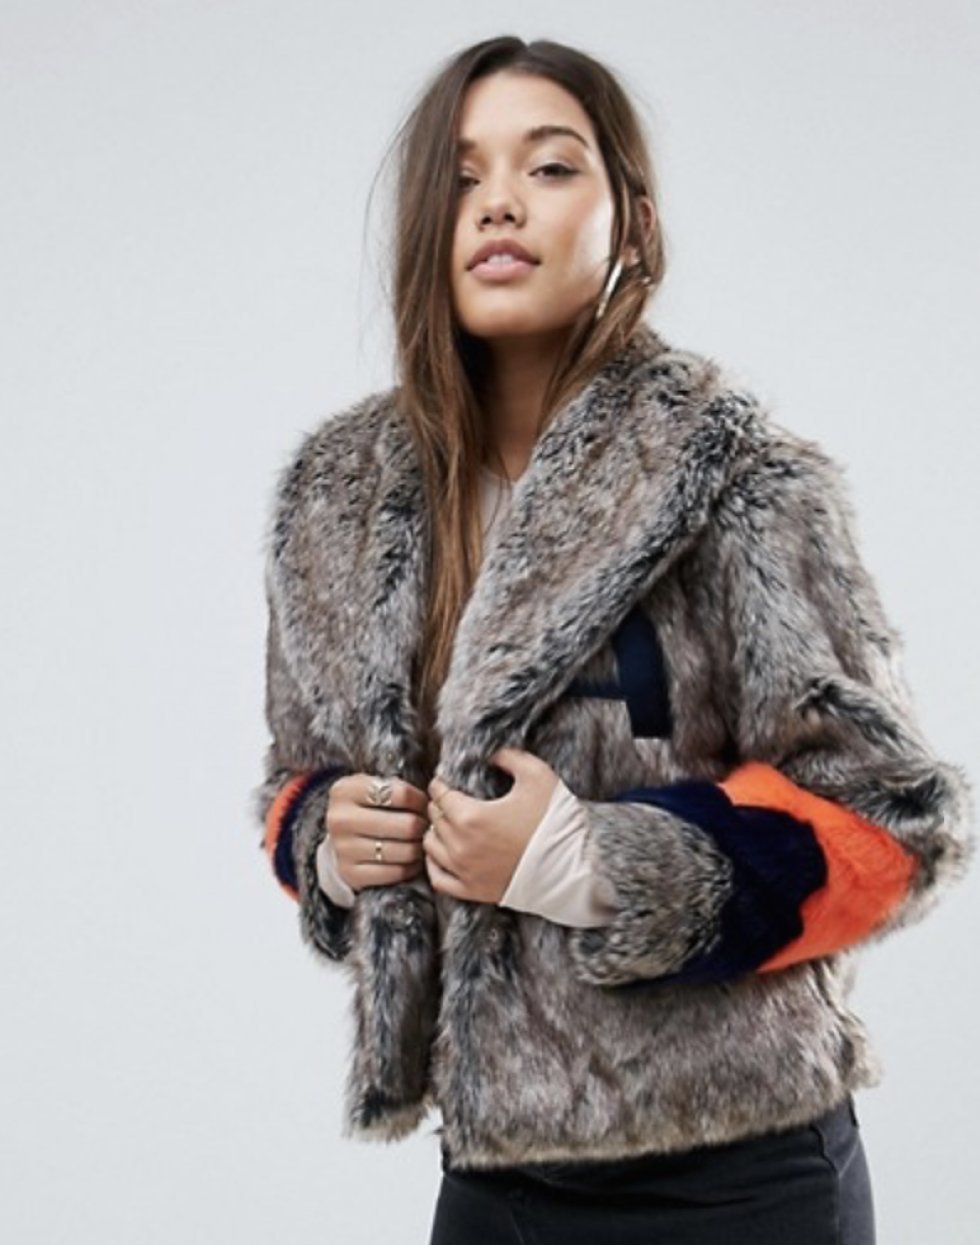 Faux Fur for the win!